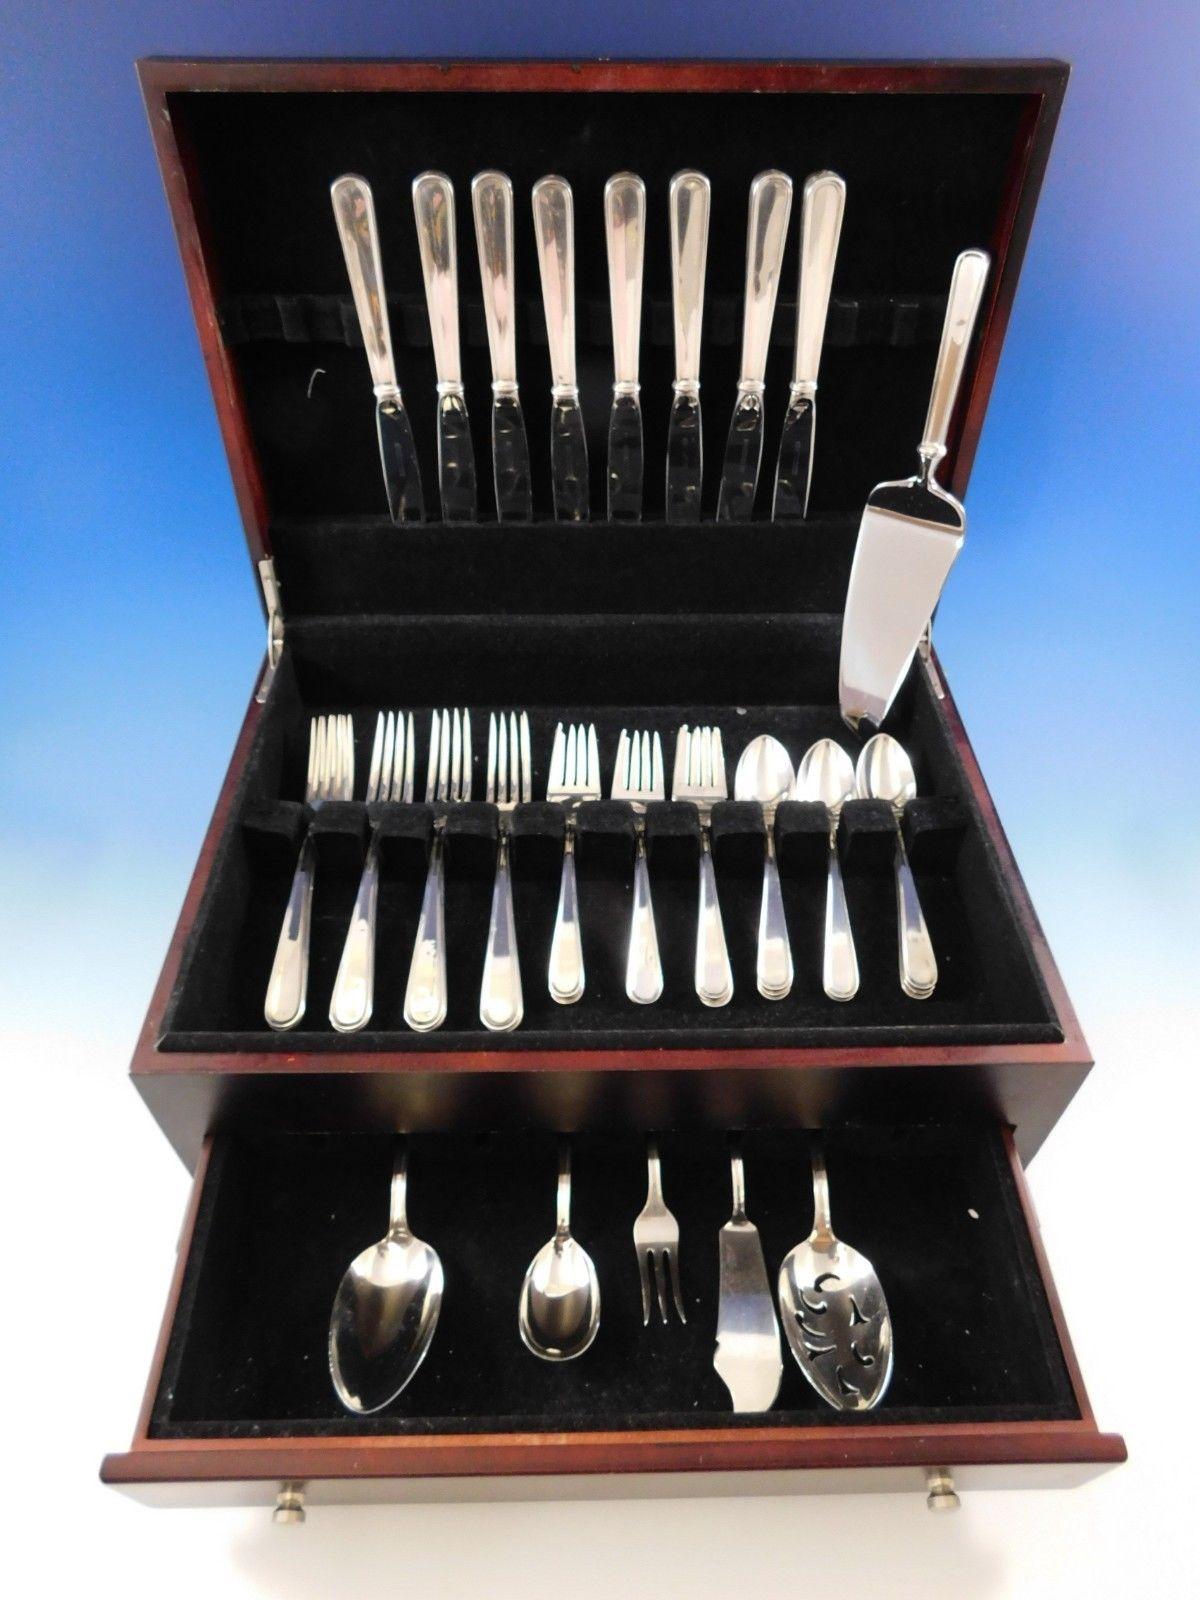 Beautifully simple Calvert by Kirk & Son. sterling silver flatware set of 38 pieces. This set includes:

8 knives, 9